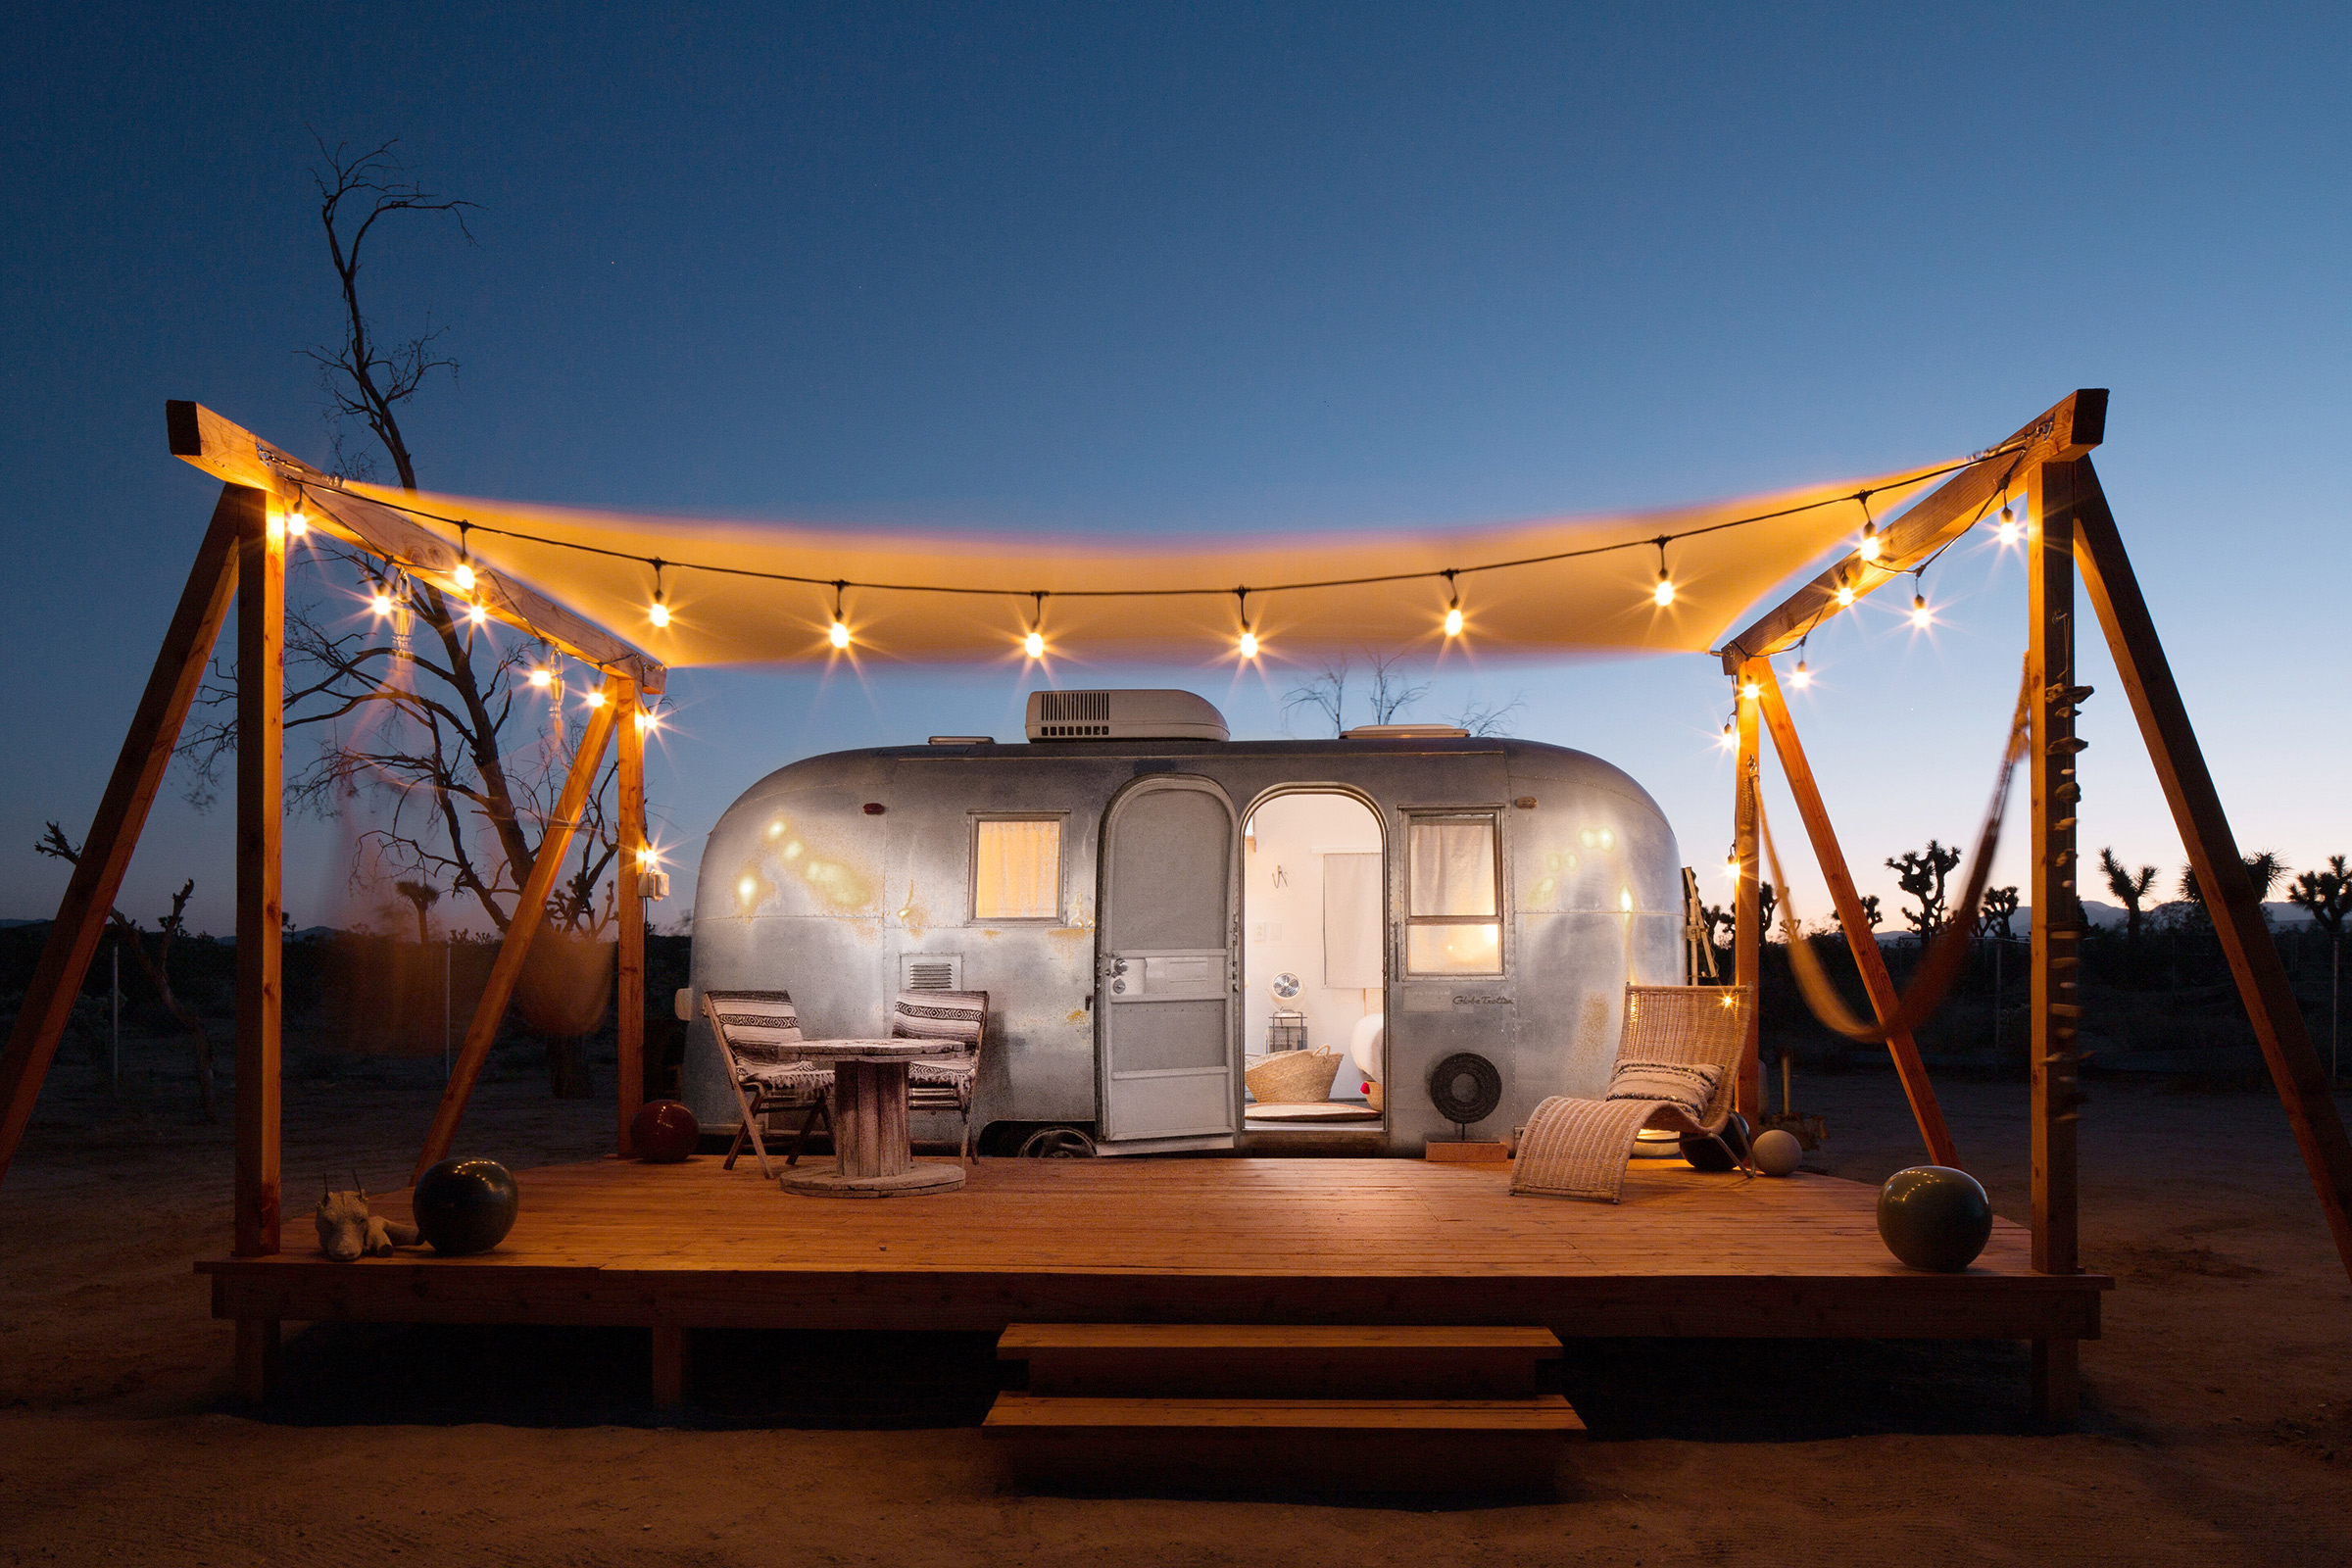 A home available on Airbnb in Joshua Tree, Calif. (Courtesy Airbnb)